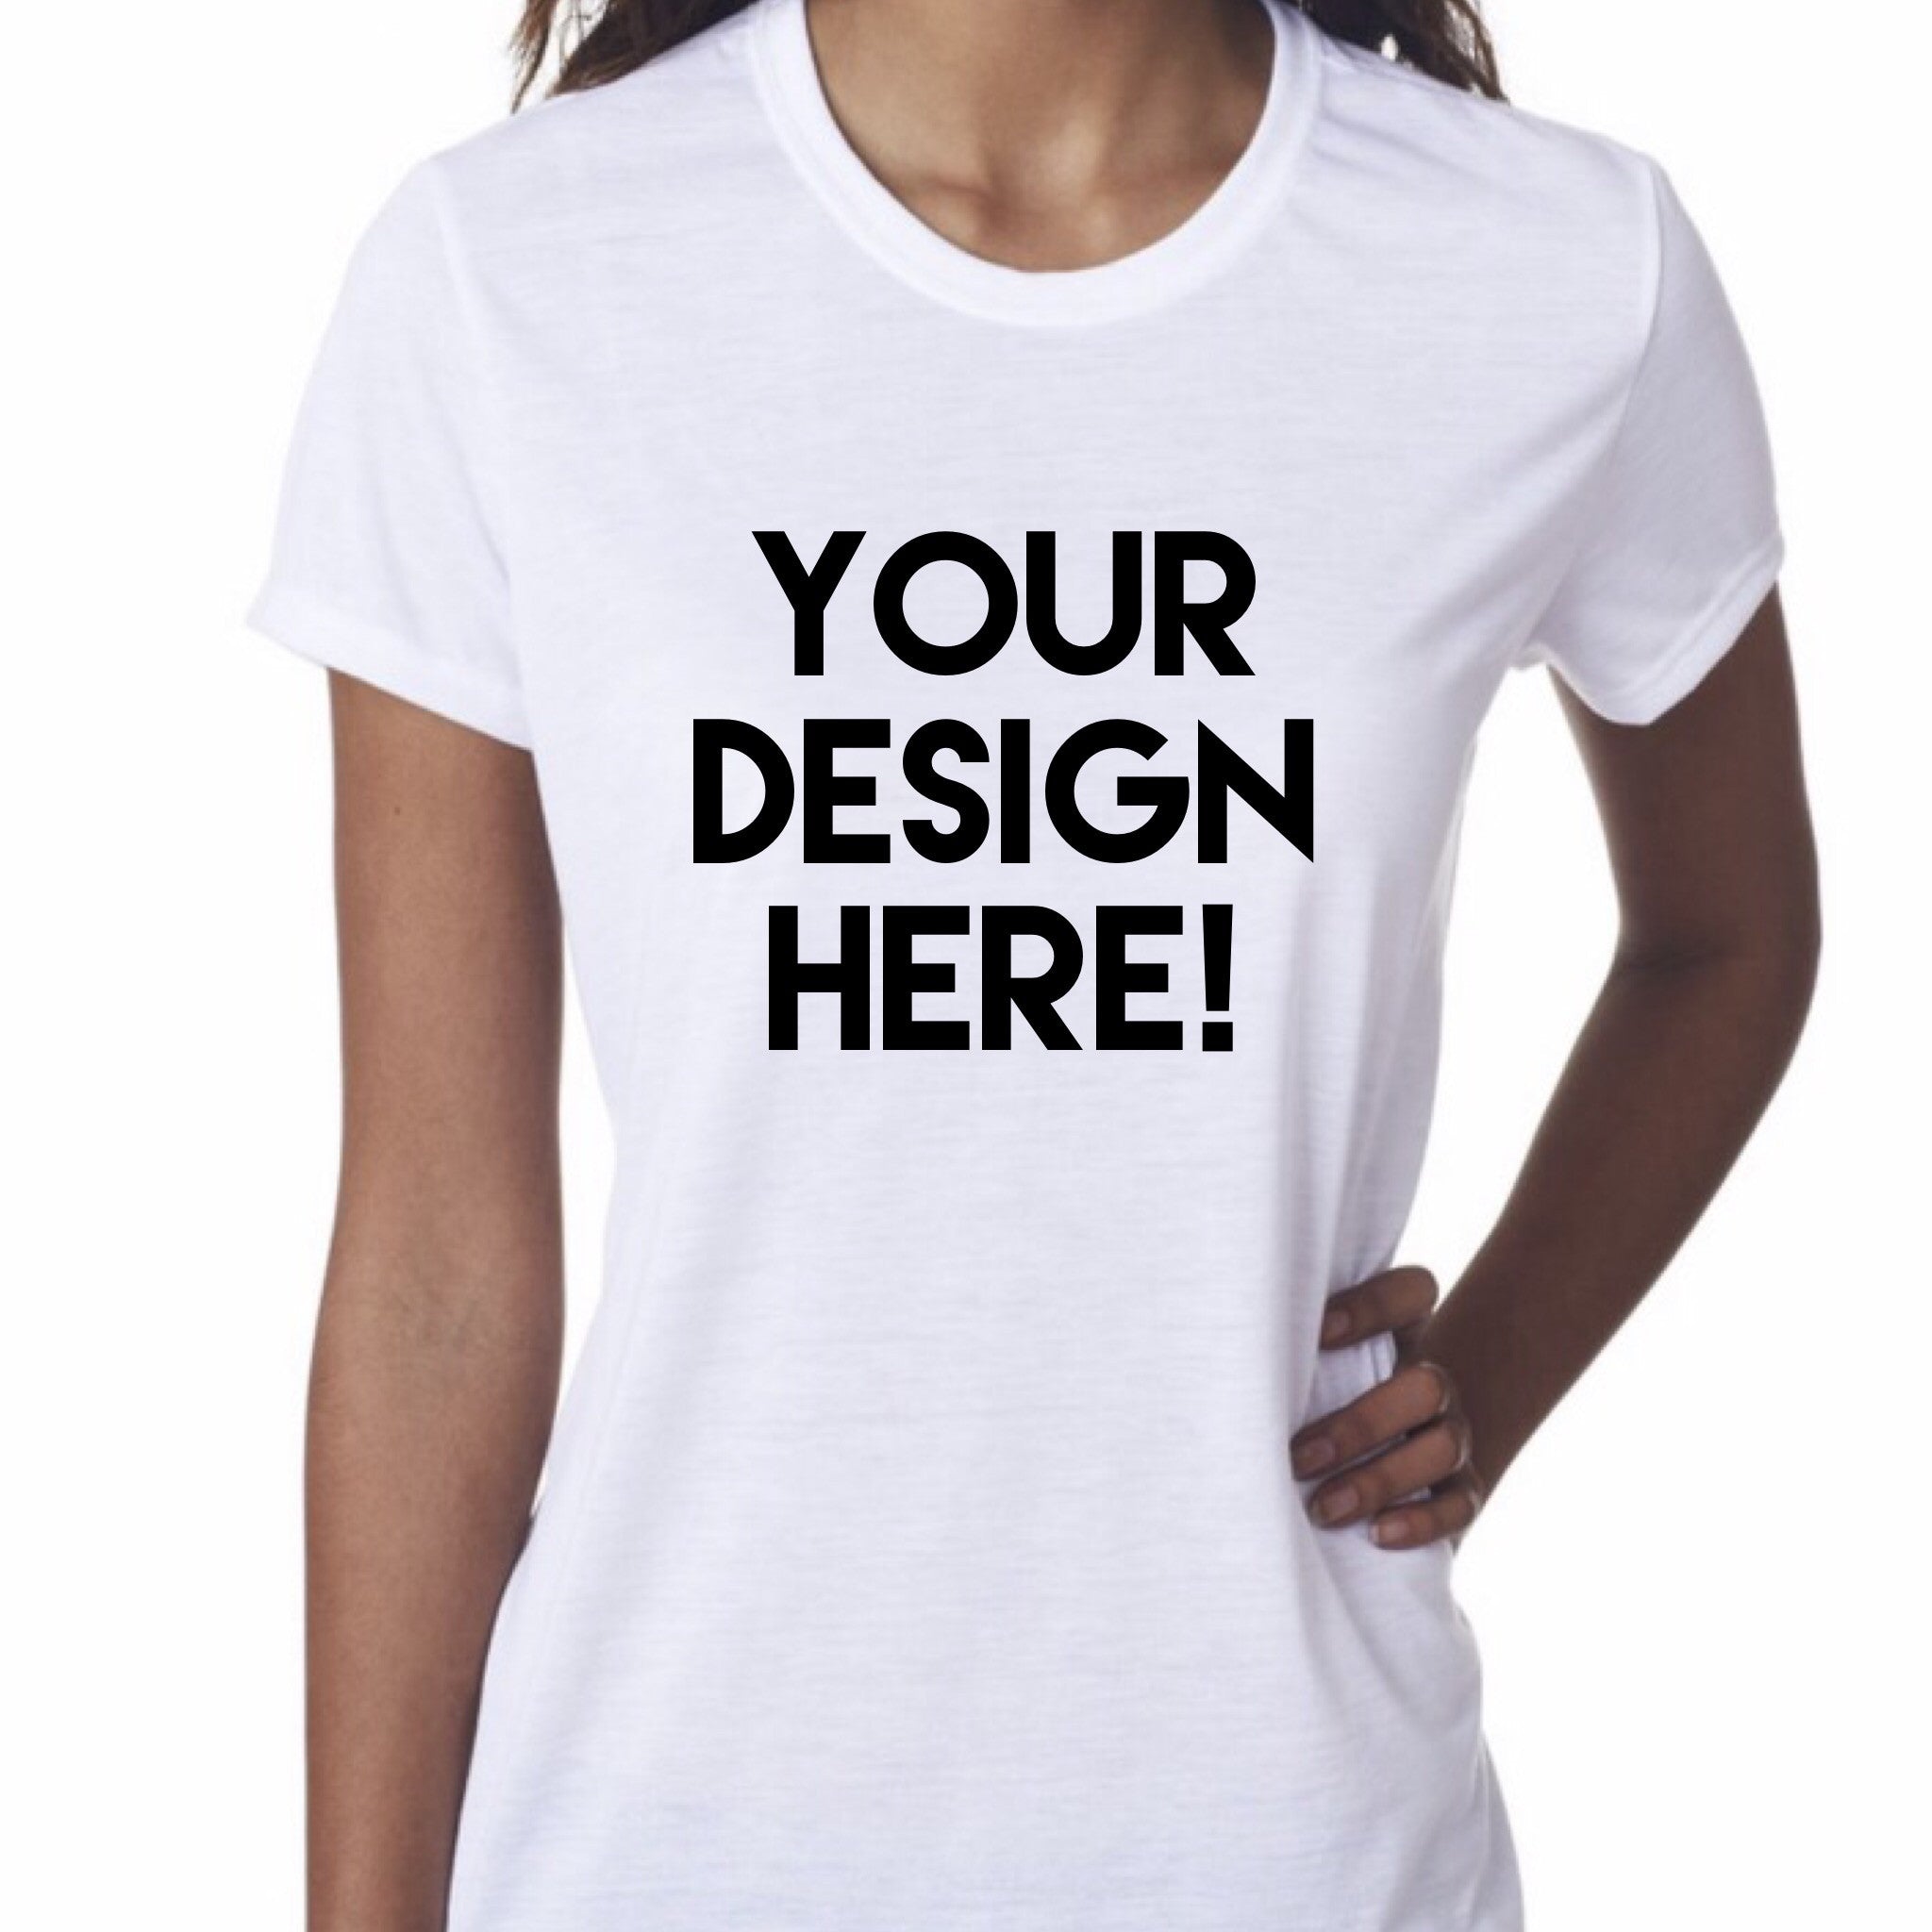 Apparel by DTLA! Custom Screen Printed for Businesses, Schools, Events, and more!